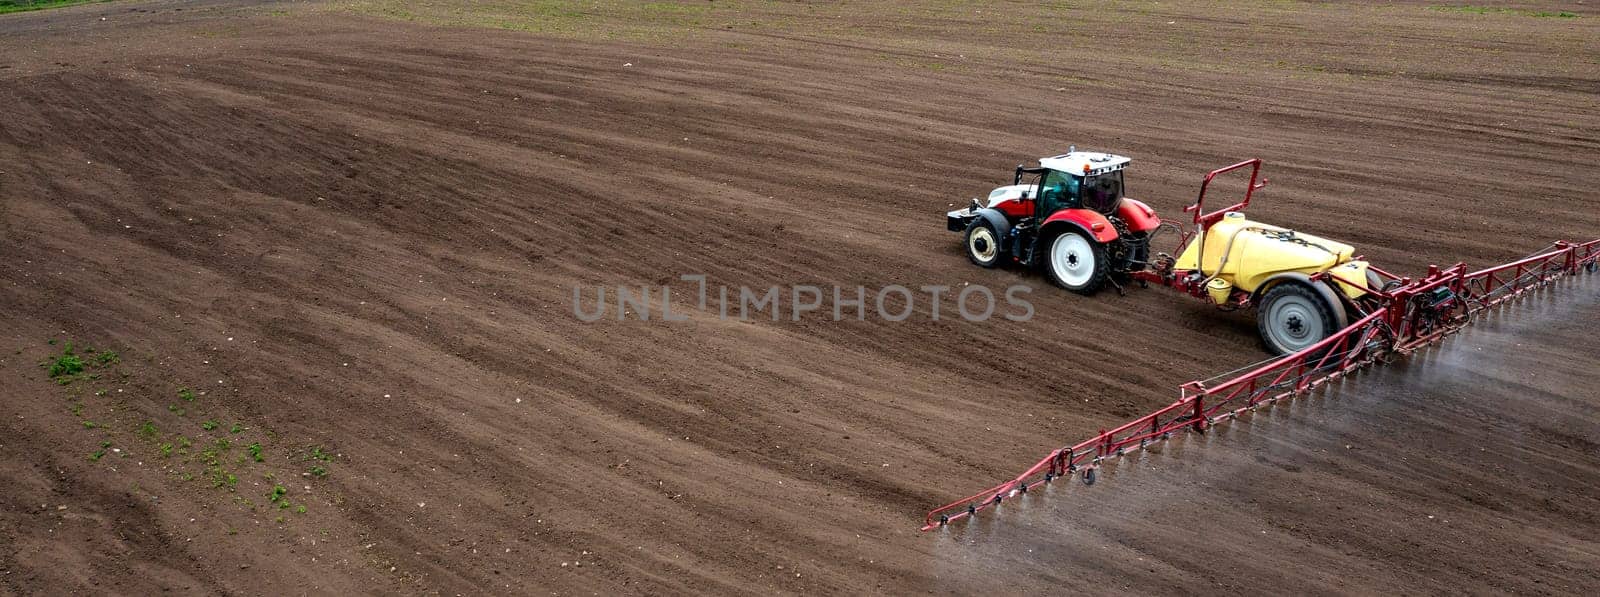 Banner view of field and tractor spraying grain by EdVal